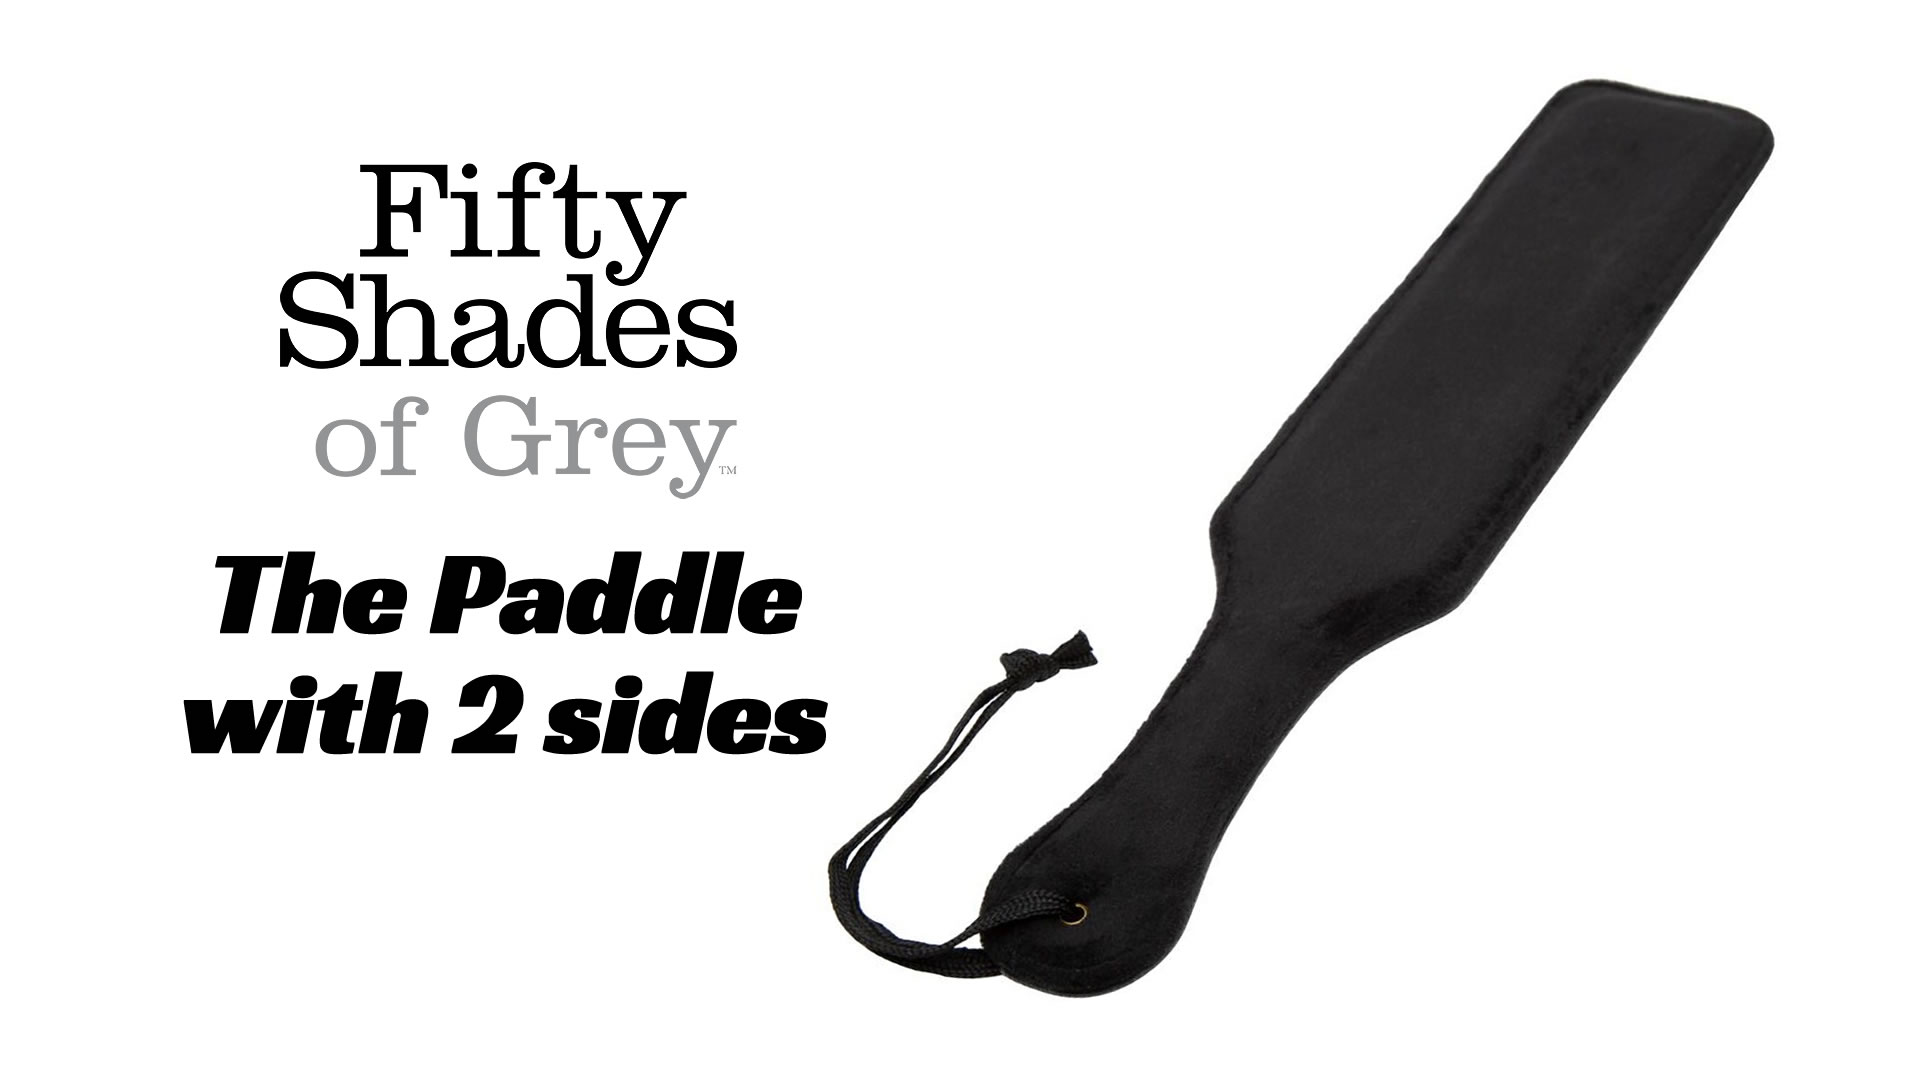 Fifty Shades of grey Bound to Paddle